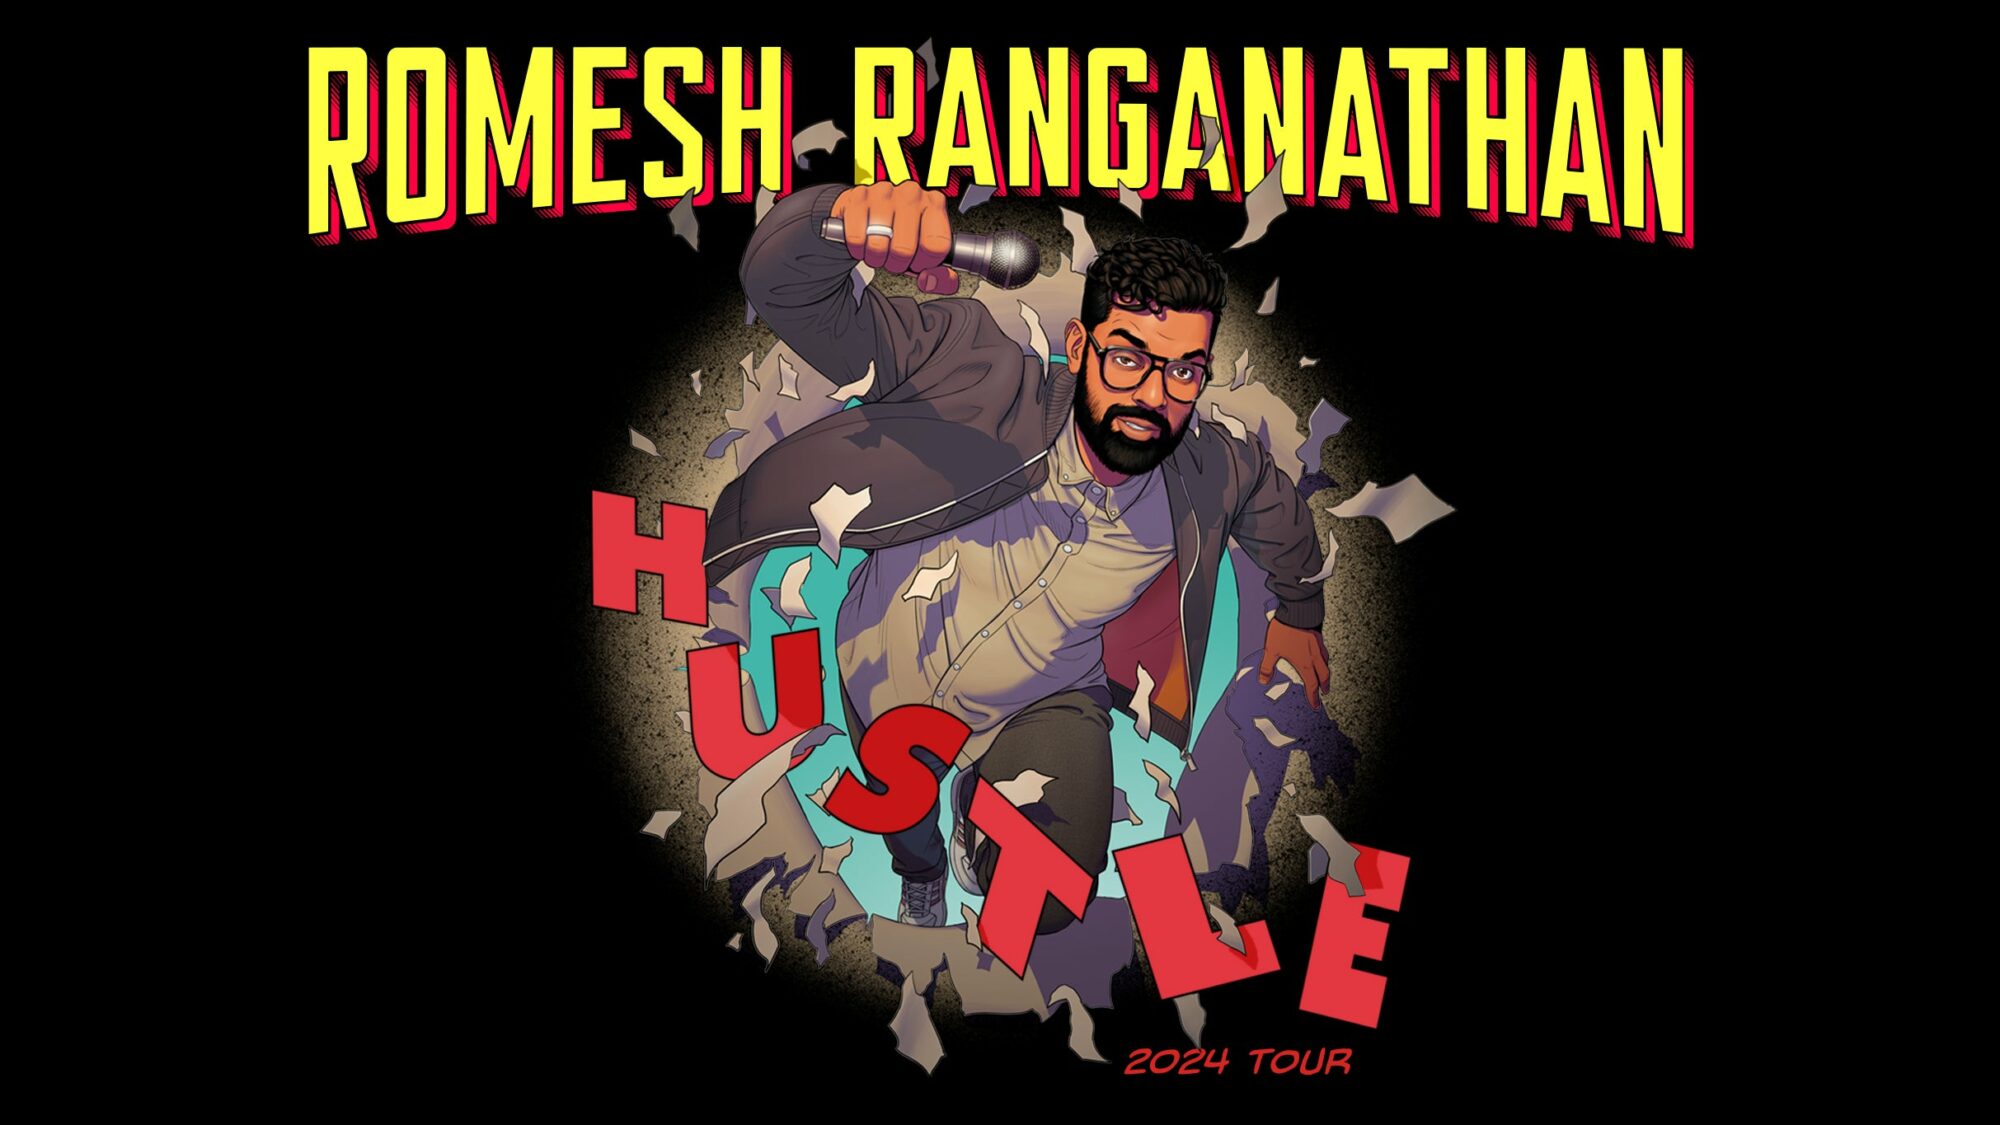 Image name Romesh Ranganathan at First Direct Arena Leeds the 2 image from the post Romesh Ranganathan - Premium Package - The Gallery at First Direct Arena, Leeds in Yorkshire.com.